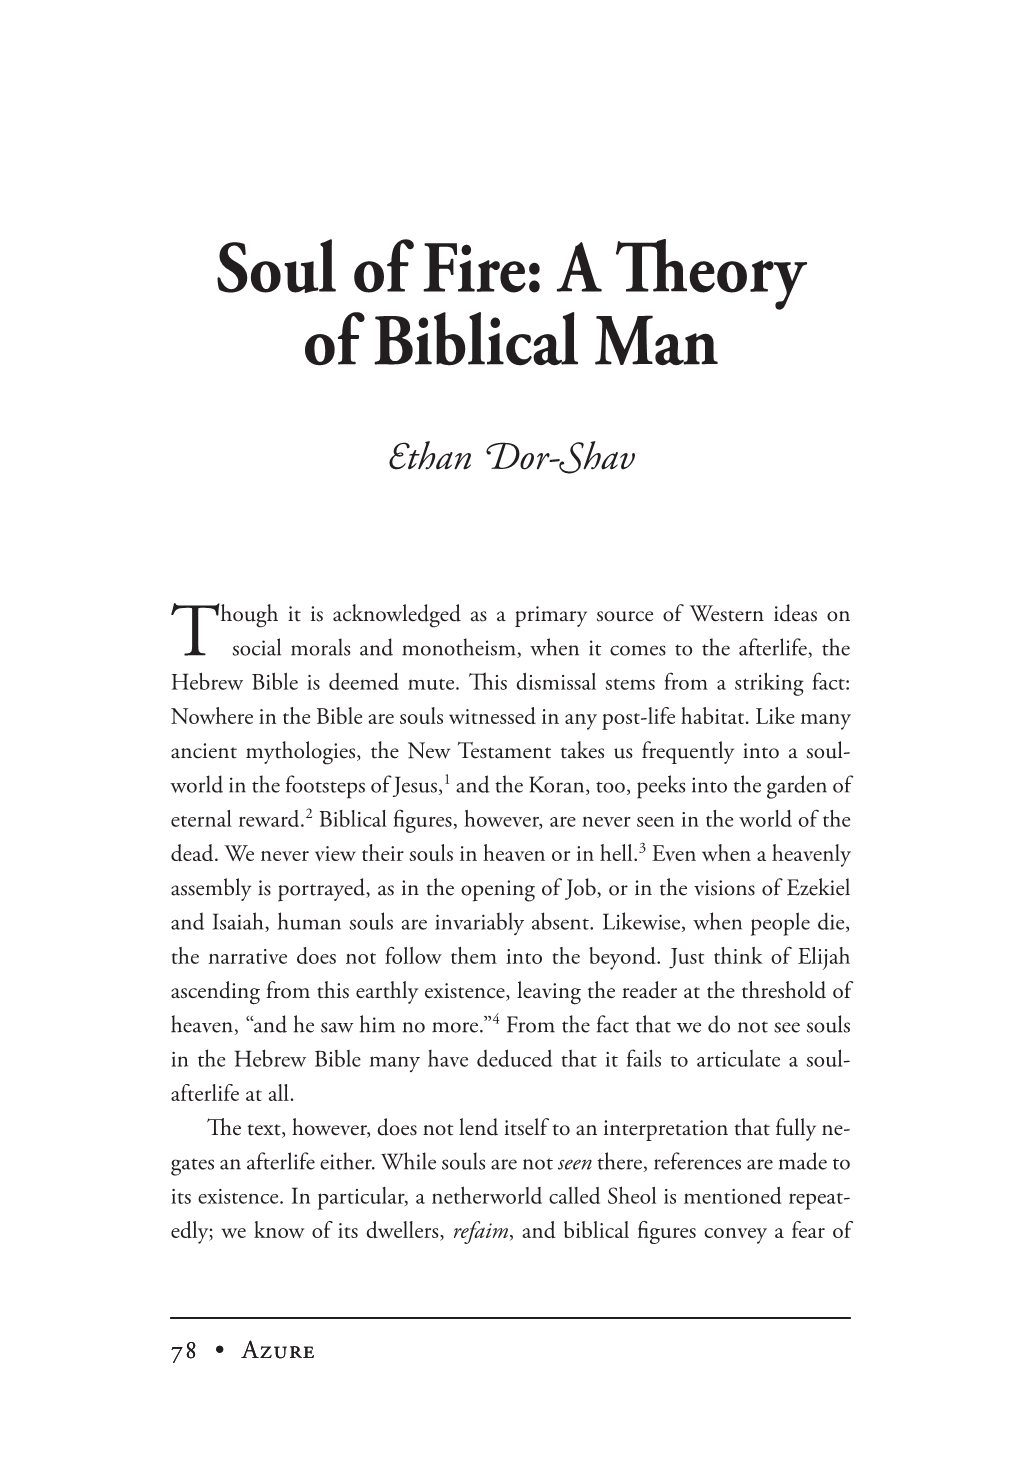 Soul of Fire: a Eory of Biblical